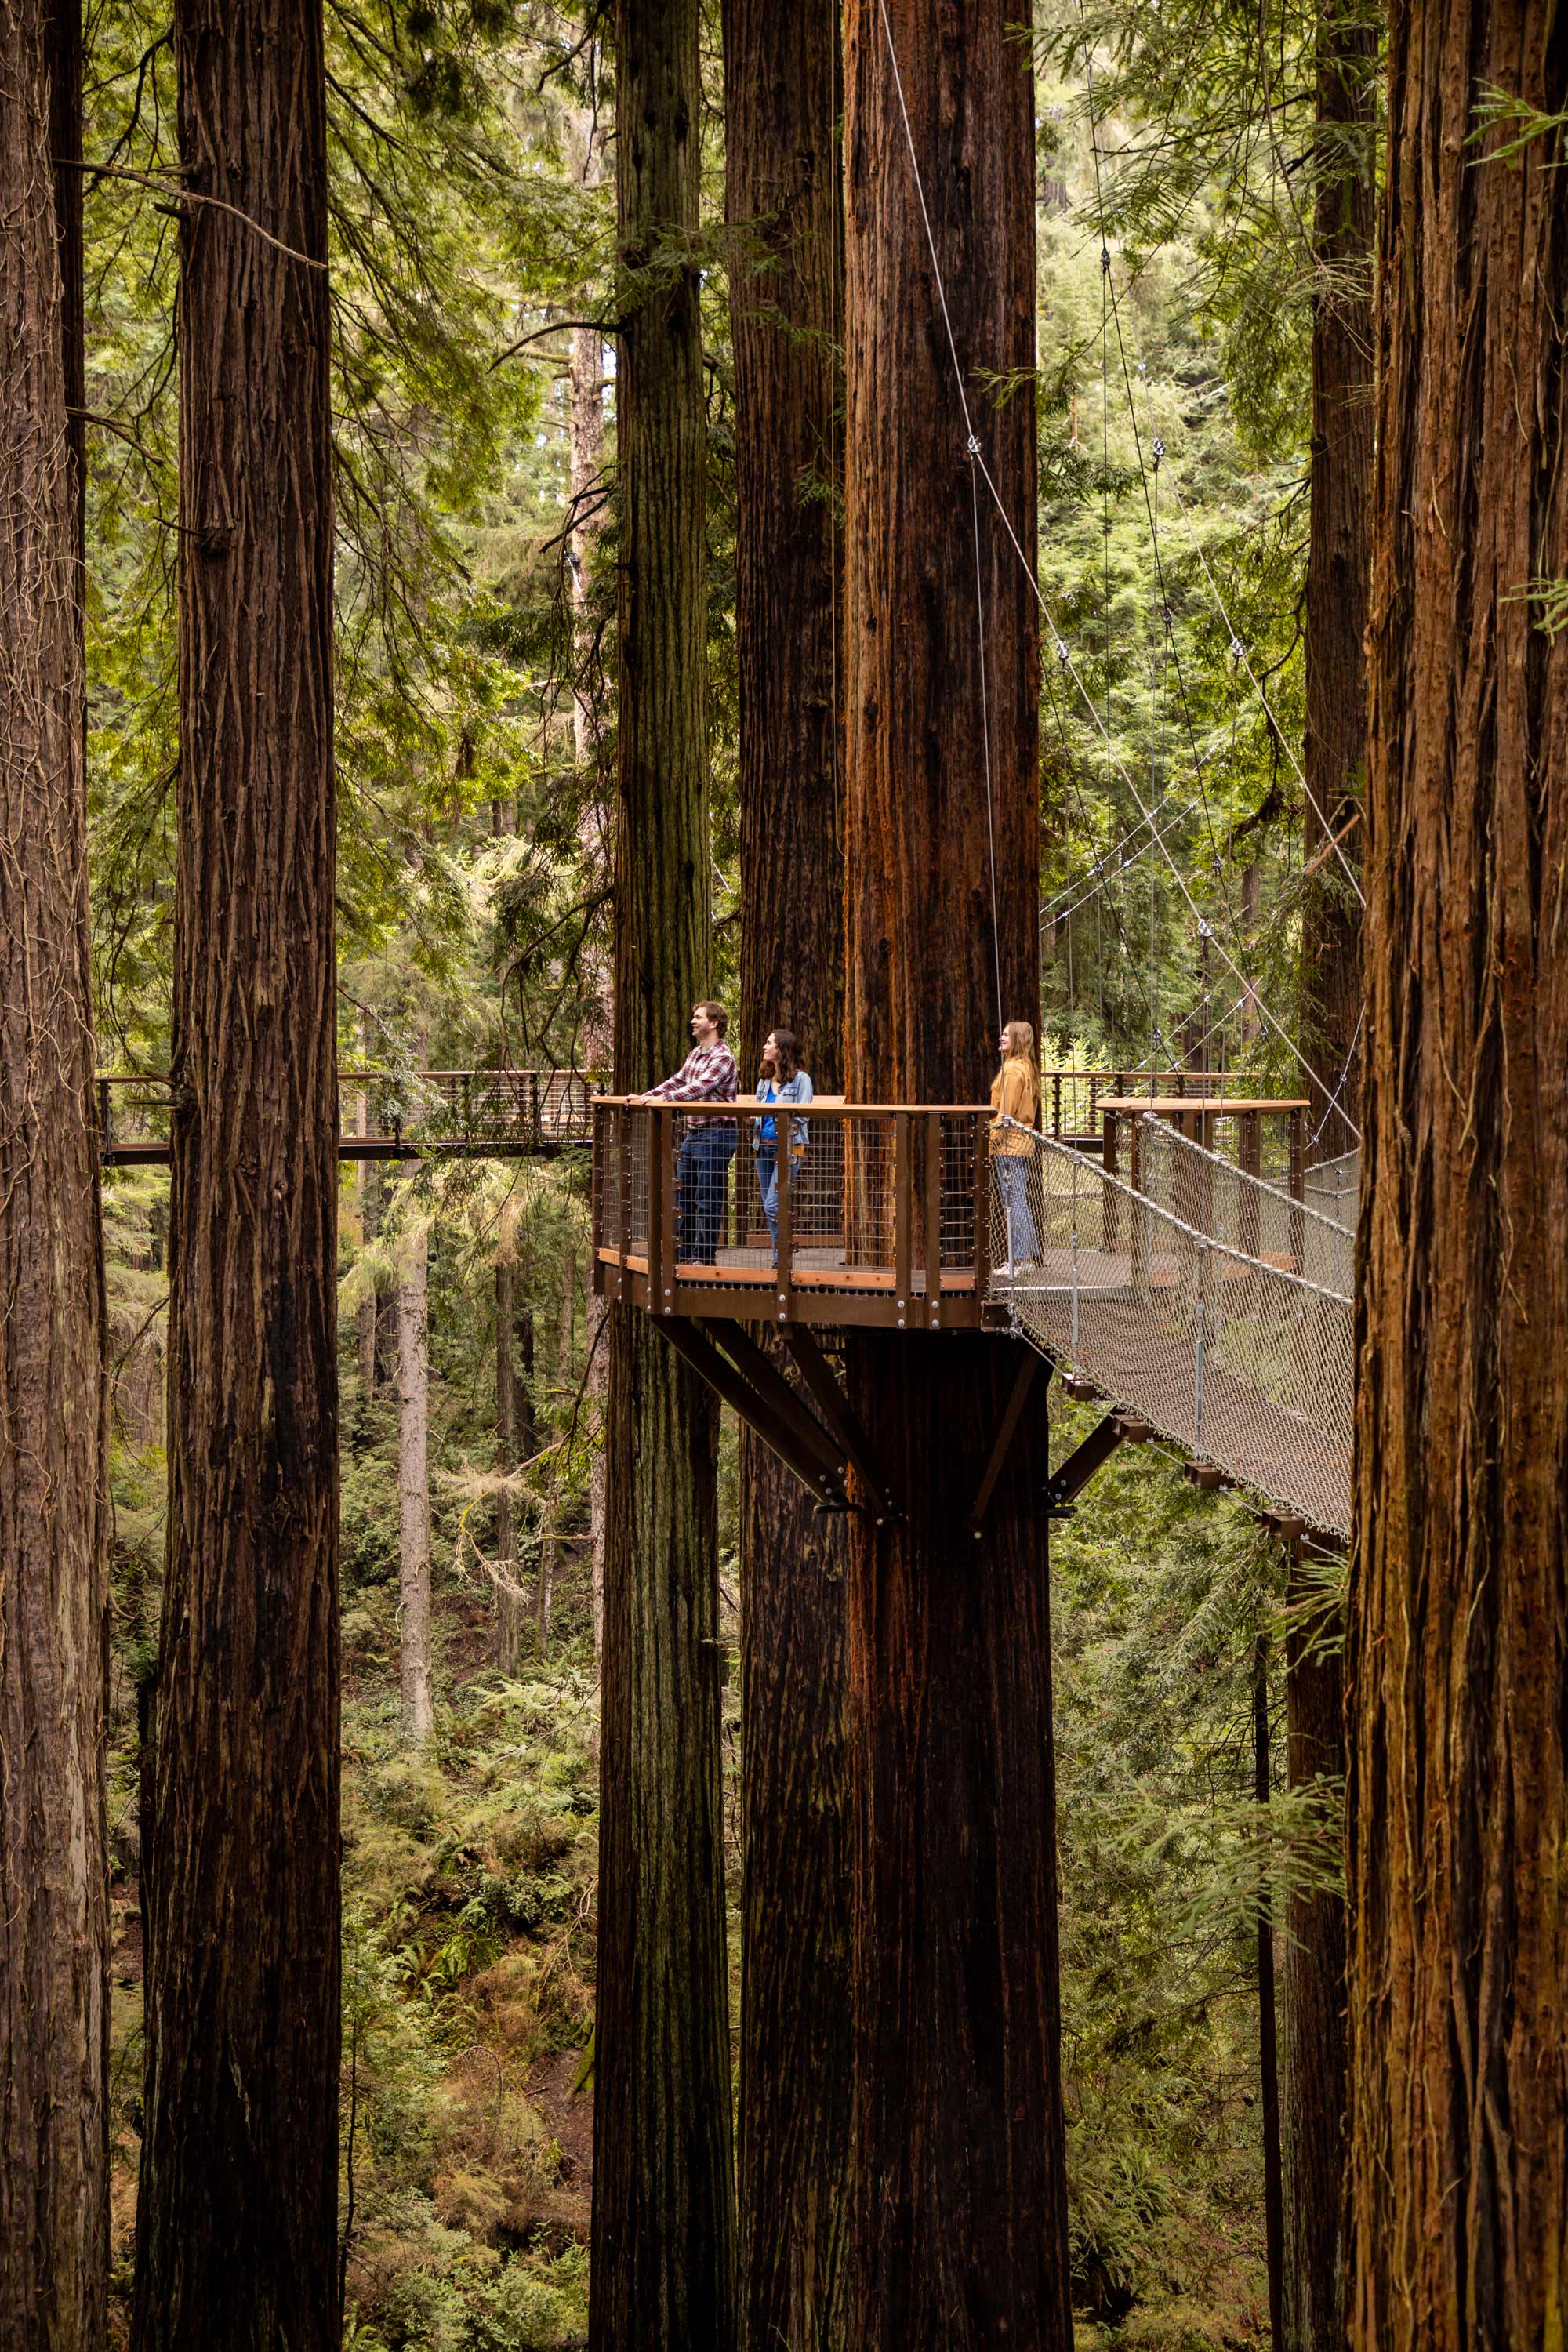 Go on California's new forest sky walk. Get a redwood to plant at home